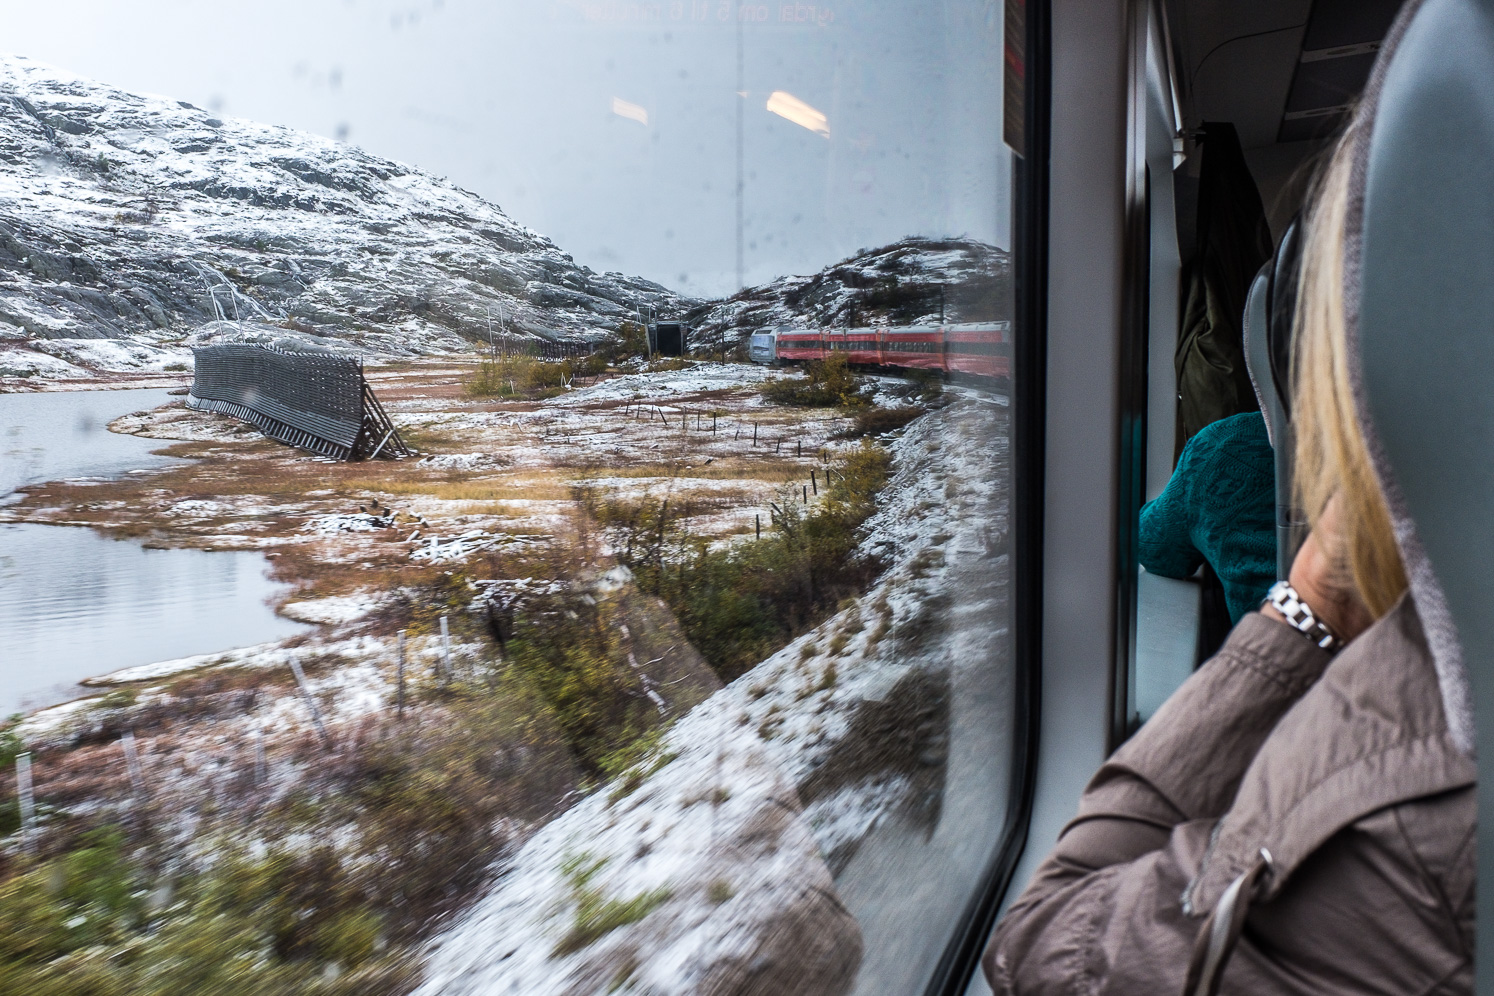 Between hallingskeid and Myrdal. Snow screens can be seen to the left side of the train.